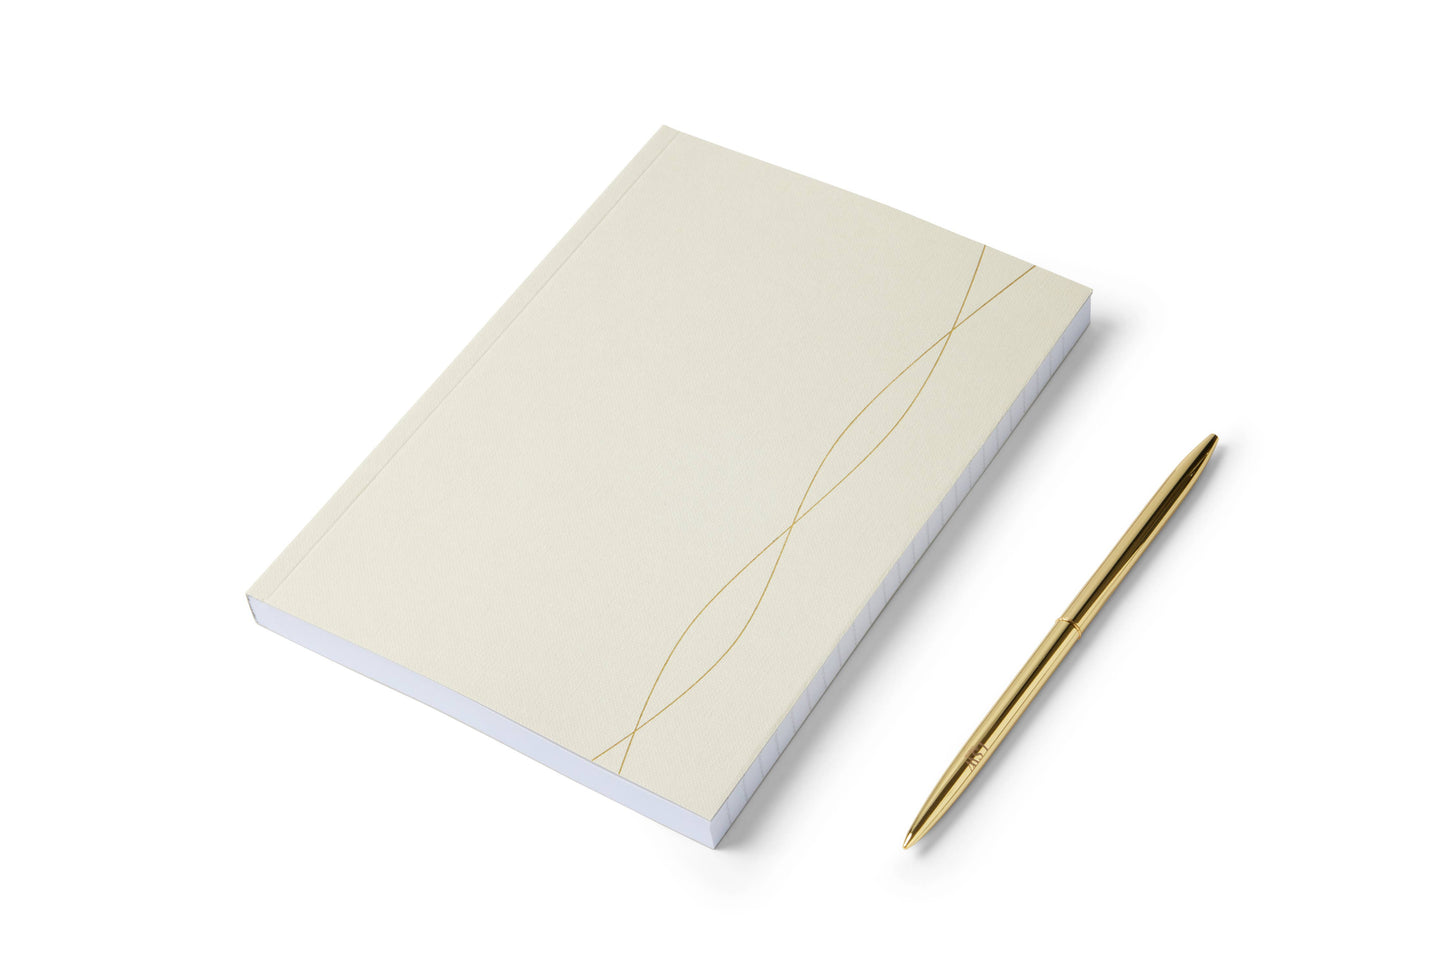 A5 Lined Notebooks in Mist, Ruled Notepads, Stationery pre order arriving soon